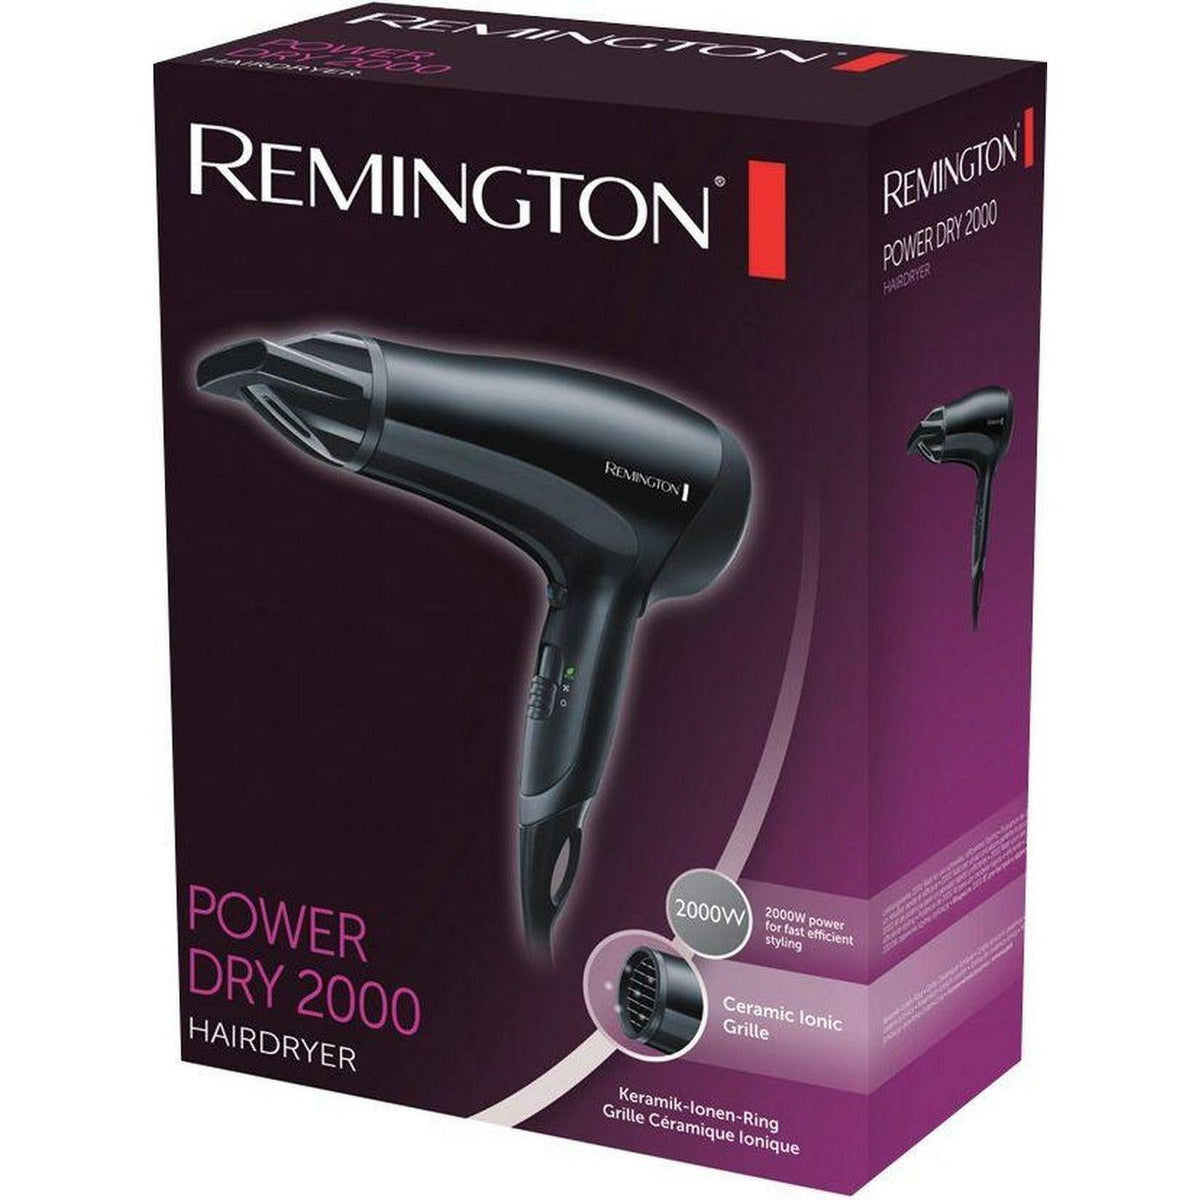 Remington Power Dry 2000W Hair Dryer - Black | D3010 from DID Electrical - guaranteed Irish, guaranteed quality service. (6890783080636)